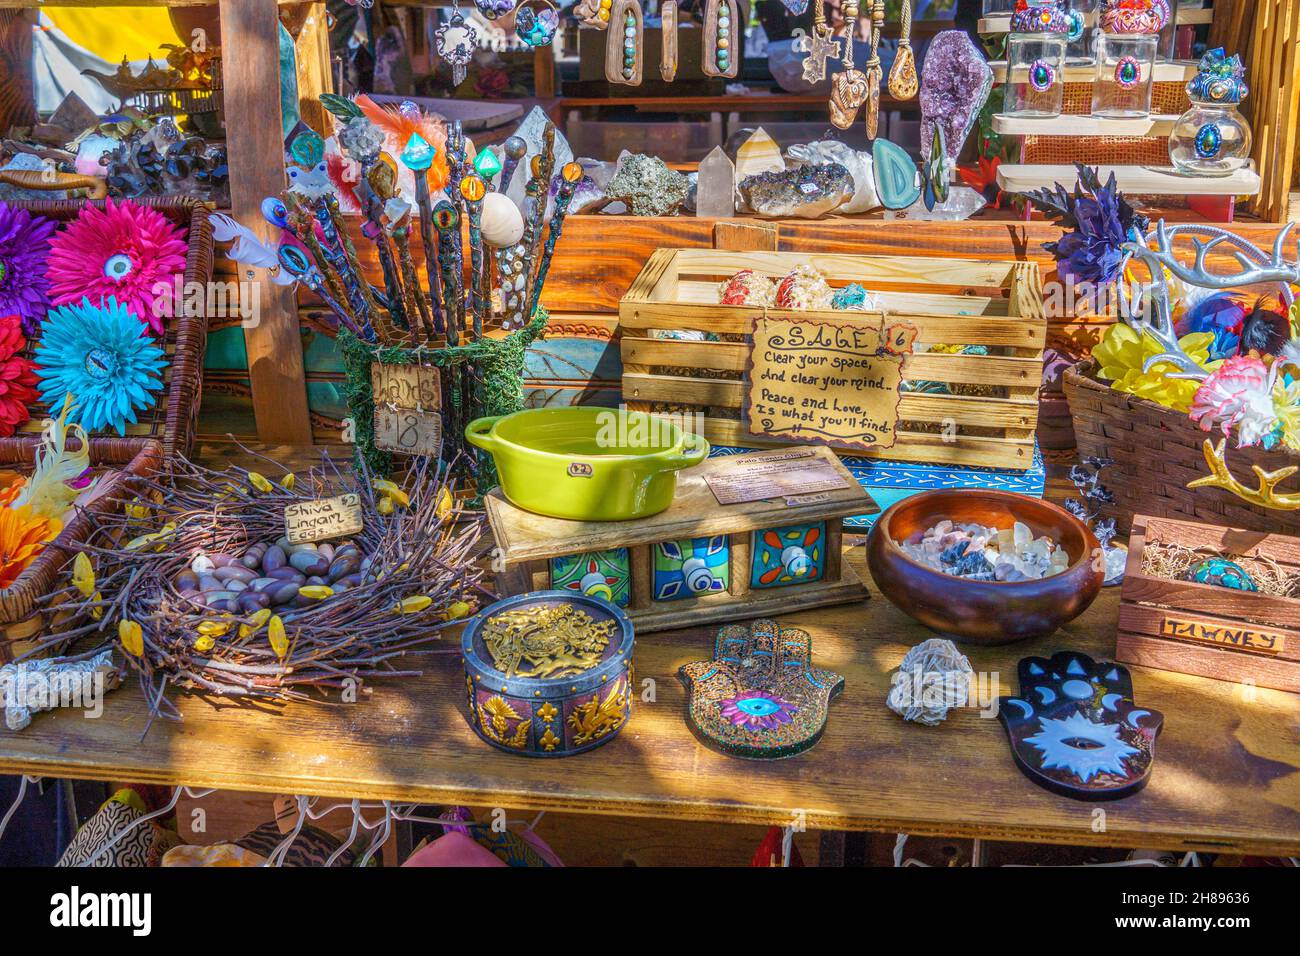 Closeup of stones, crystals, wands and other goods for sale at the Lady of the Lakes Renaissance Faire - Tavares, Florida, USA Stock Photo